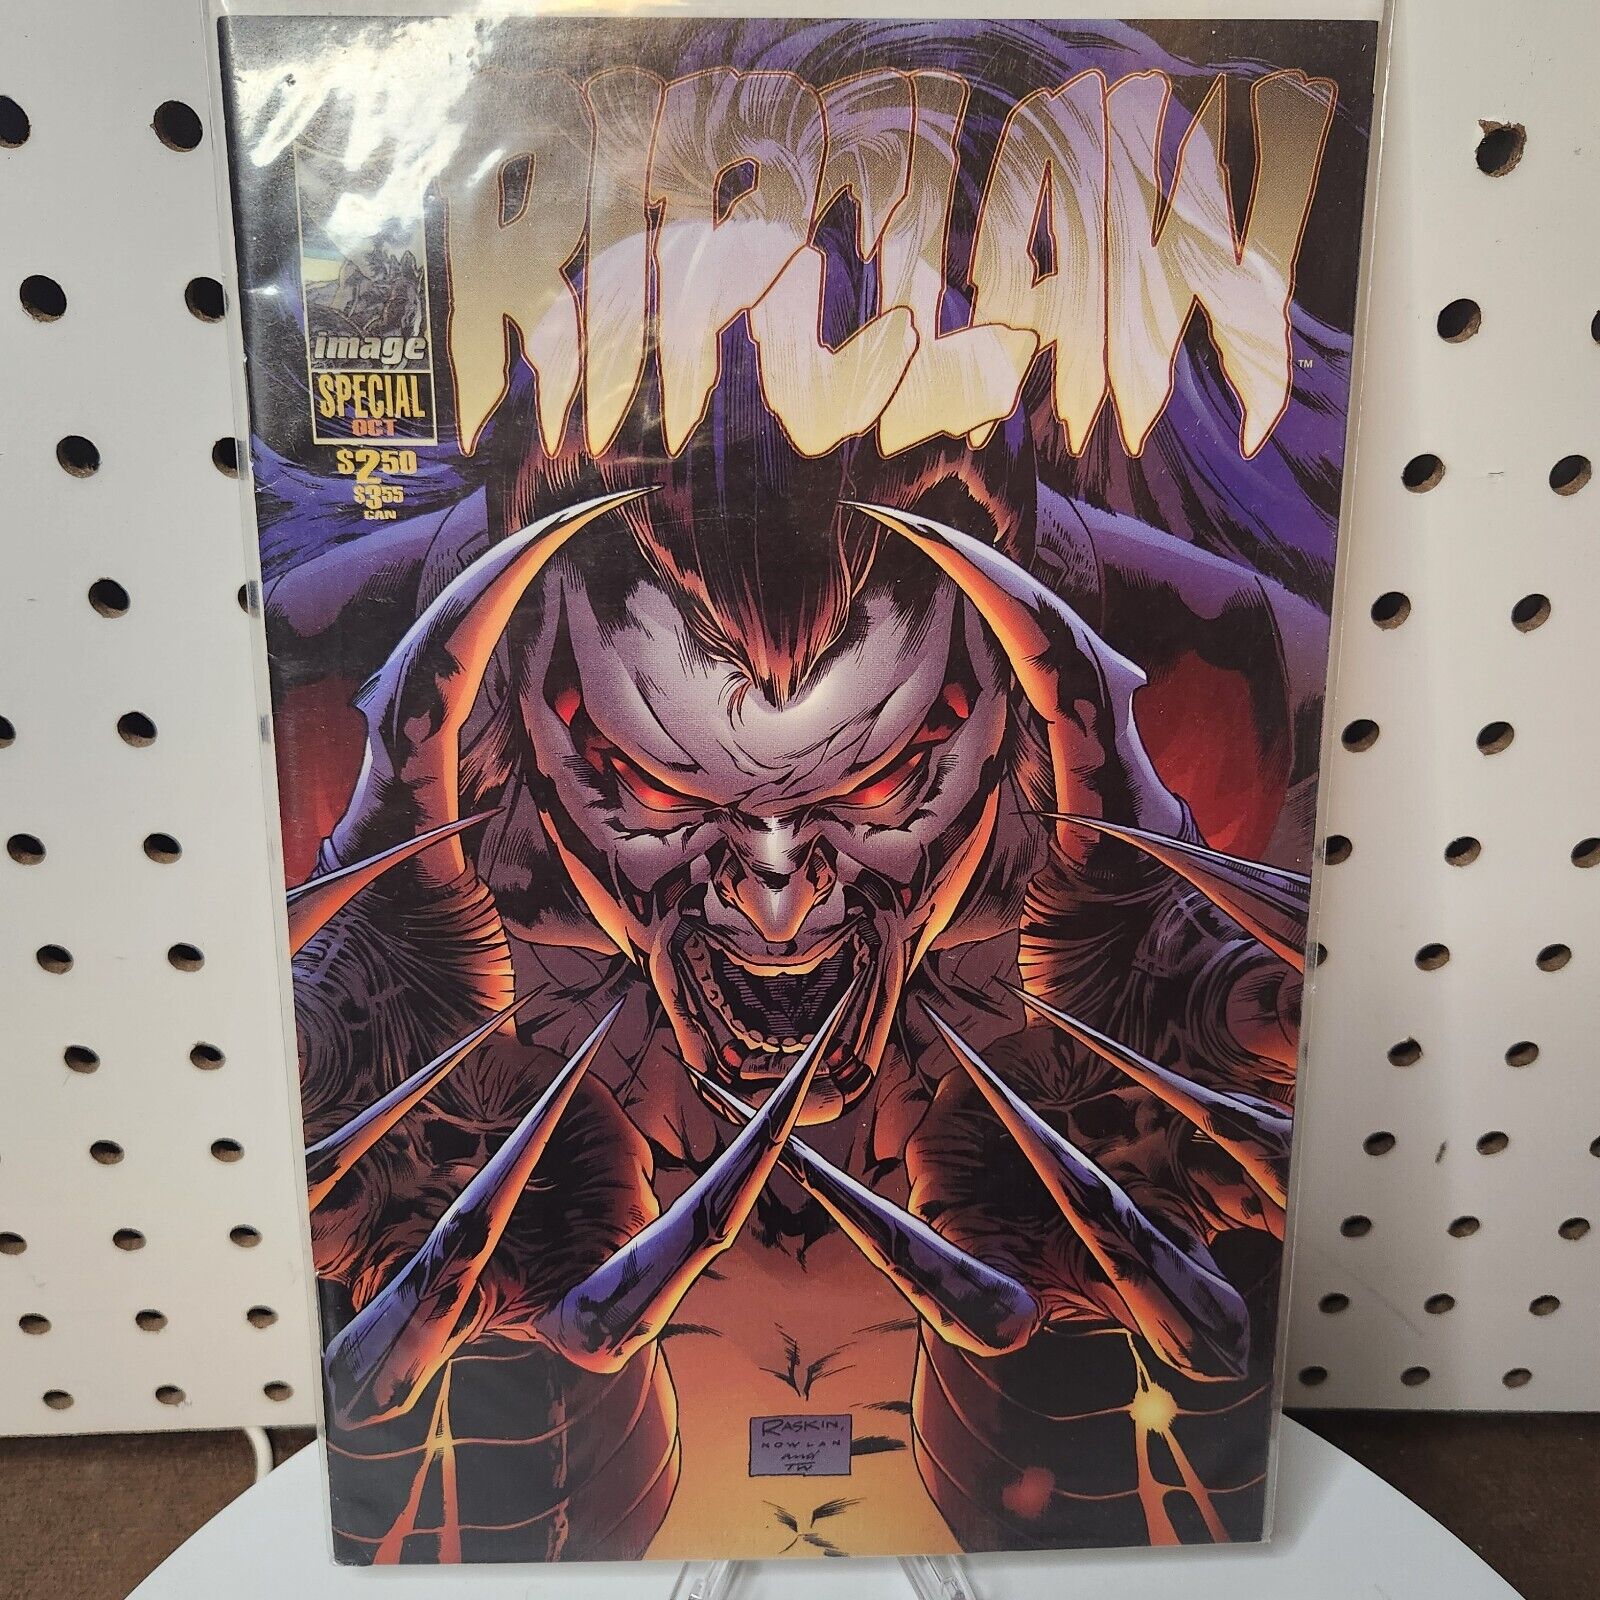 RIPCLAW By Image Comics Issue Special #1 Oct 1995 Raskin Nowlan and TW